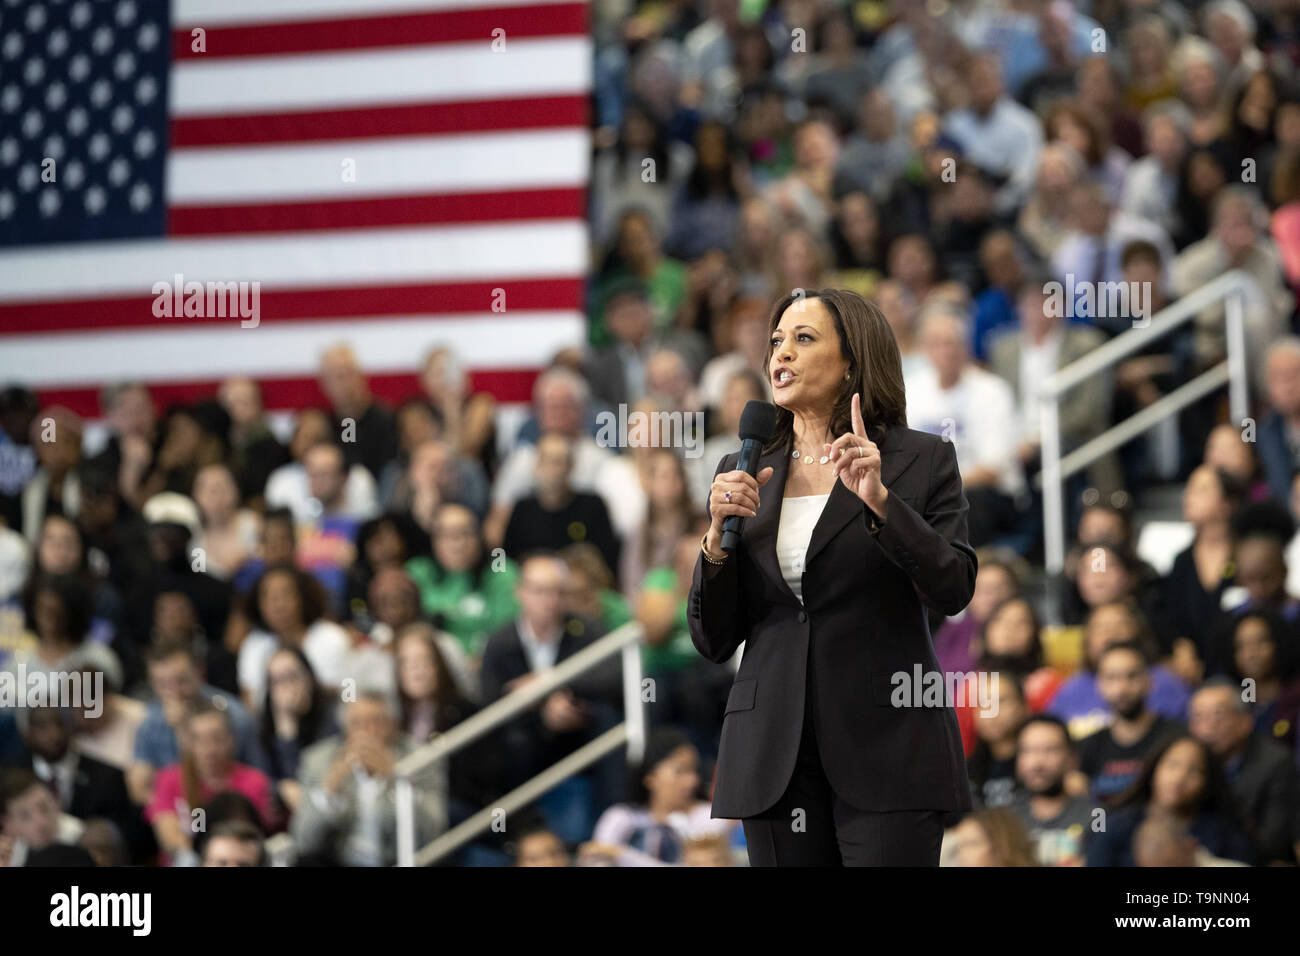 Los Angeles, CA, USA. 19th May, 2019. Democratic presidential candidate U.S. Senator Kamala Harris (D-CA) seen speaking at a campaign rally in Los Angeles. This was Harris's first campaign rally in Los Angeles since she announced her candidacy for the President of the United States. The candidate spoke about the need to combat gun violence, raise teacher pay and provide middle class tax relief. Credit: Ronen Tivony/SOPA Images/ZUMA Wire/Alamy Live News Stock Photo